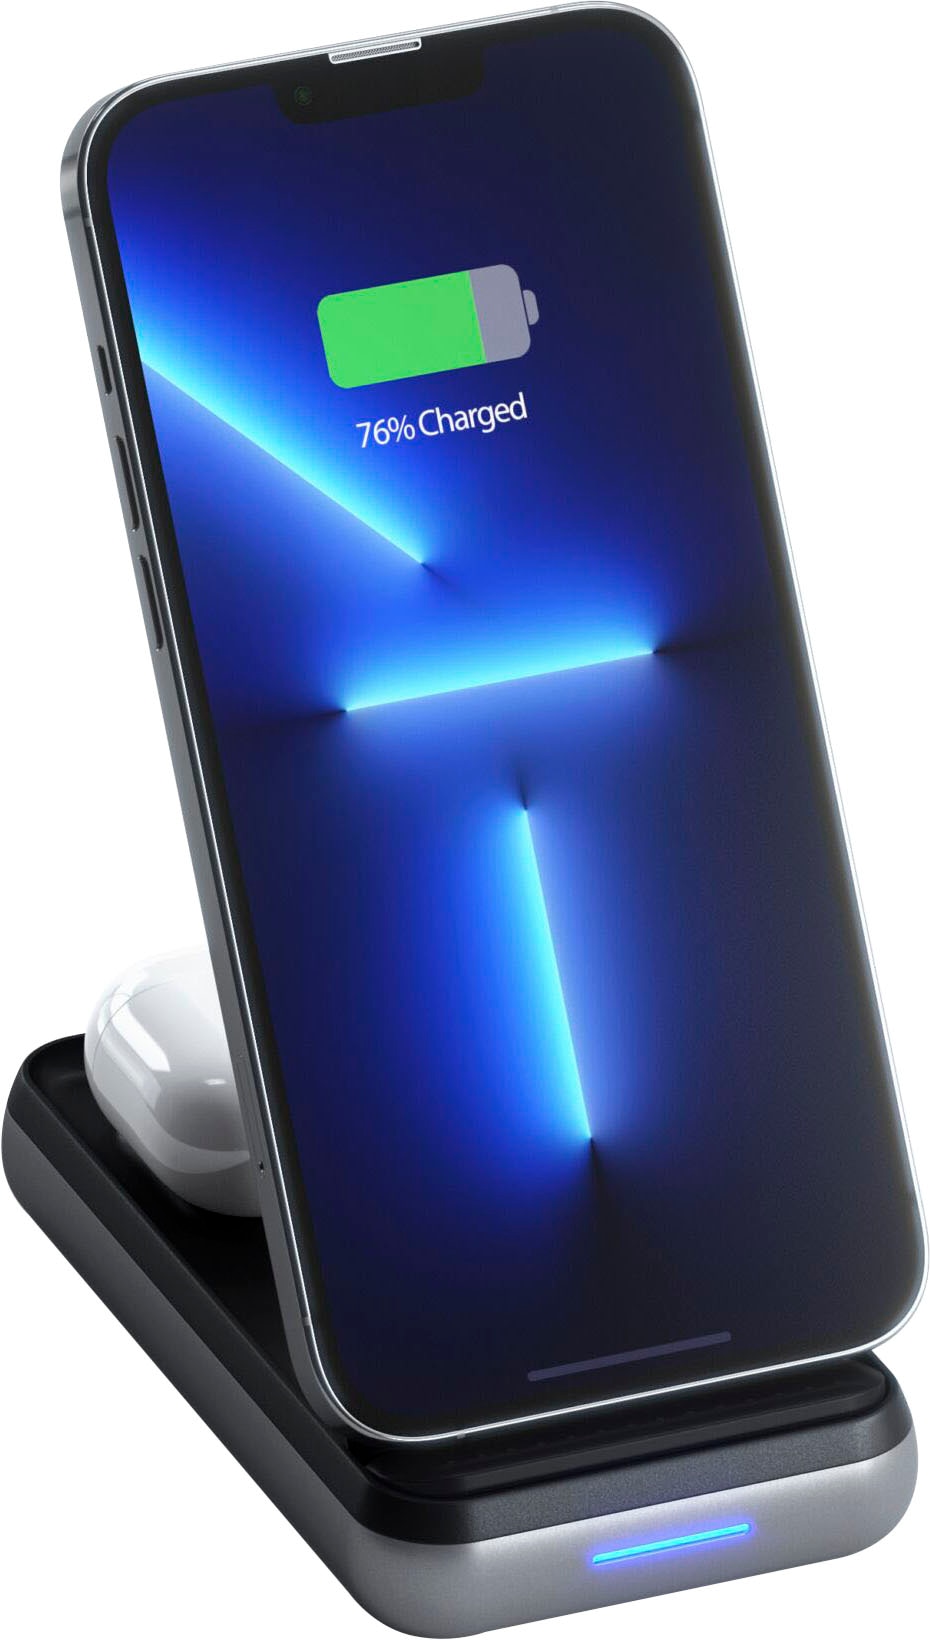 Smartphone-Ladegerät »Duo Wireless Charger Stand«